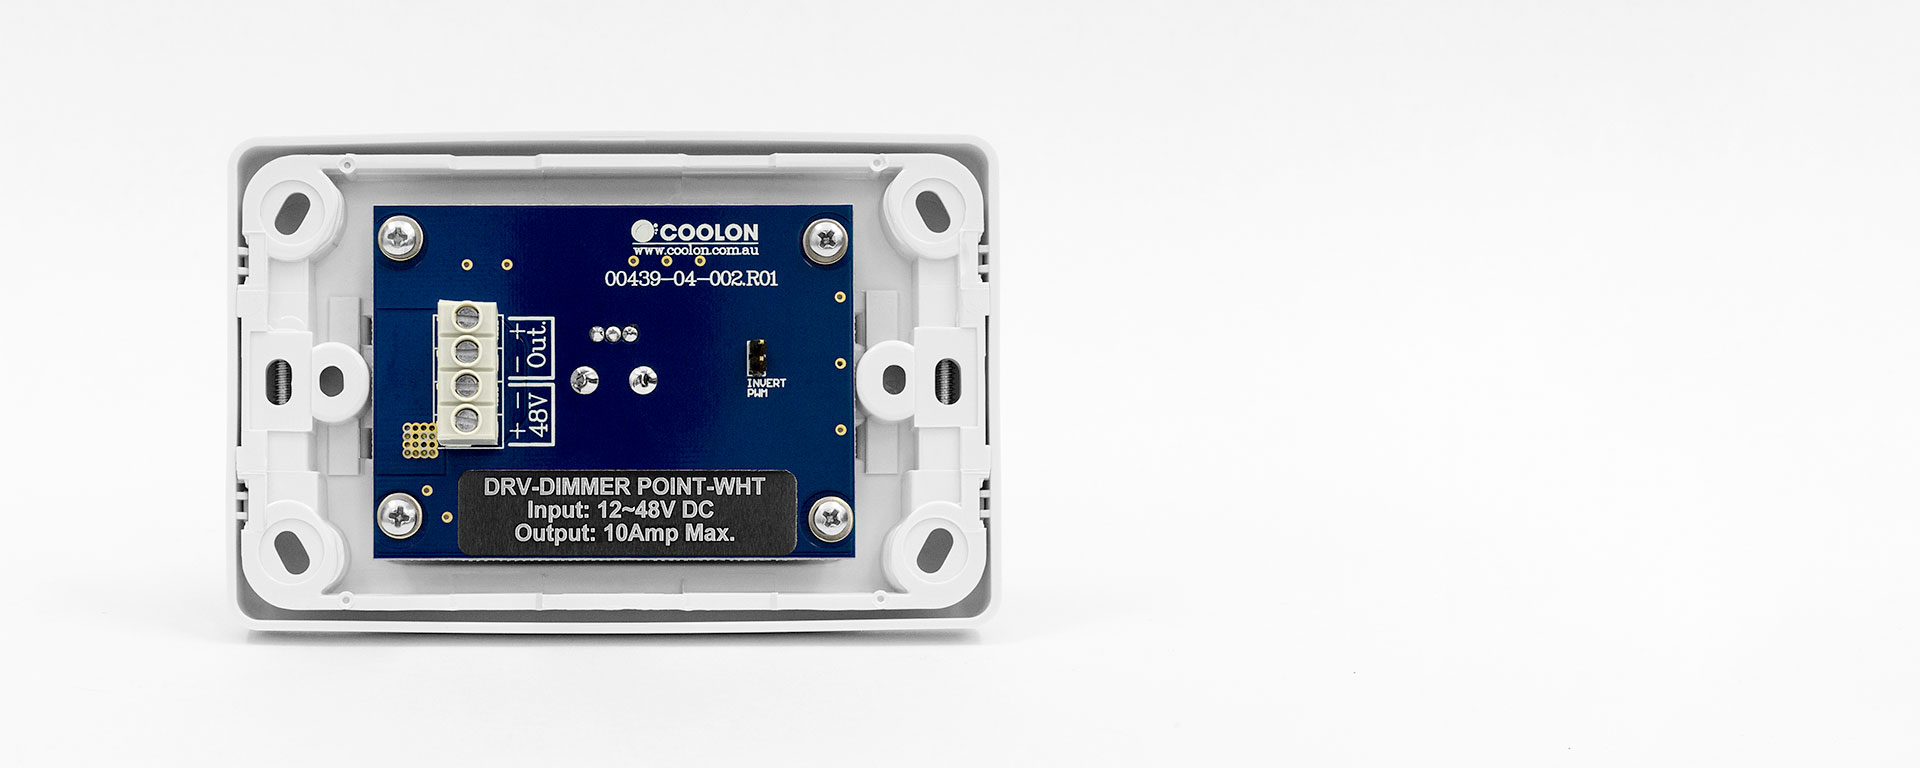 The Dimmer Point driver is designed to suit most indoor LED applications. A compact design allows it to be installed as a standard electrical faceplate.